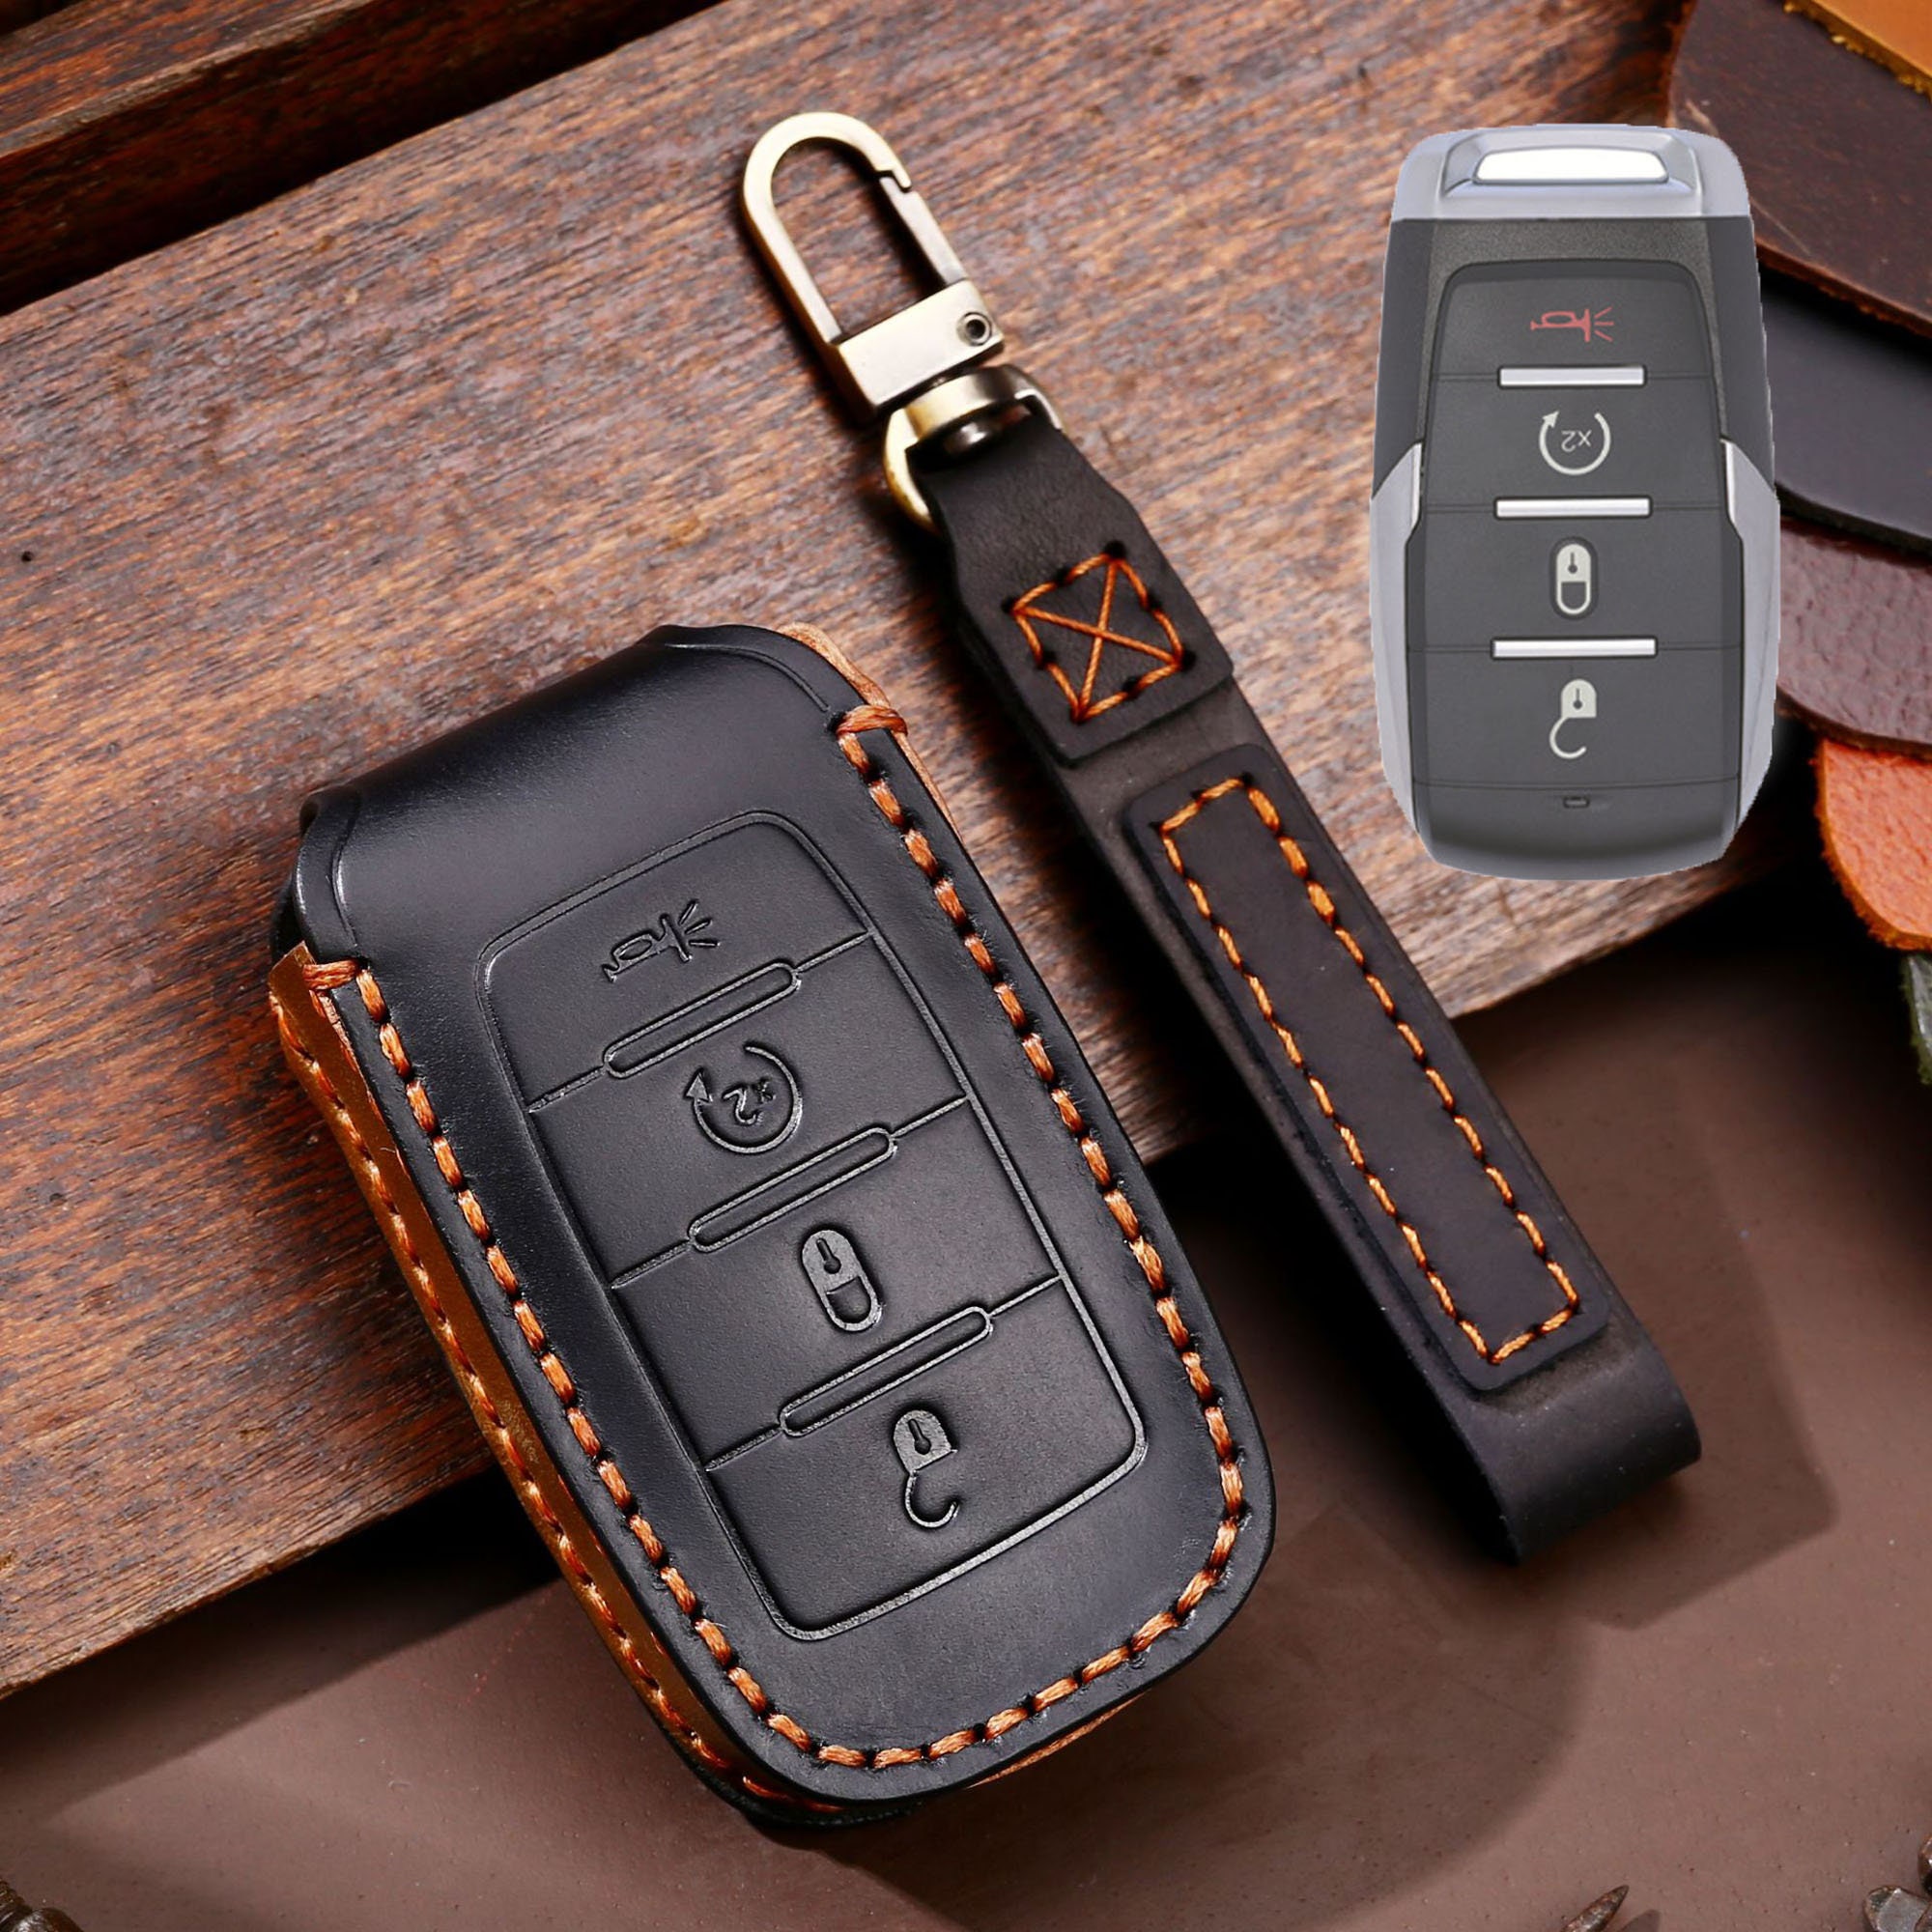  Cowhide Leather Keychain,MoreChioce Creative Car Key Chain with  2 Metal Rings Vintage Car Keyring Holder Key Chain Organizer Holder for  Motorcycles Automobiles Key,Gray : Clothing, Shoes & Jewelry